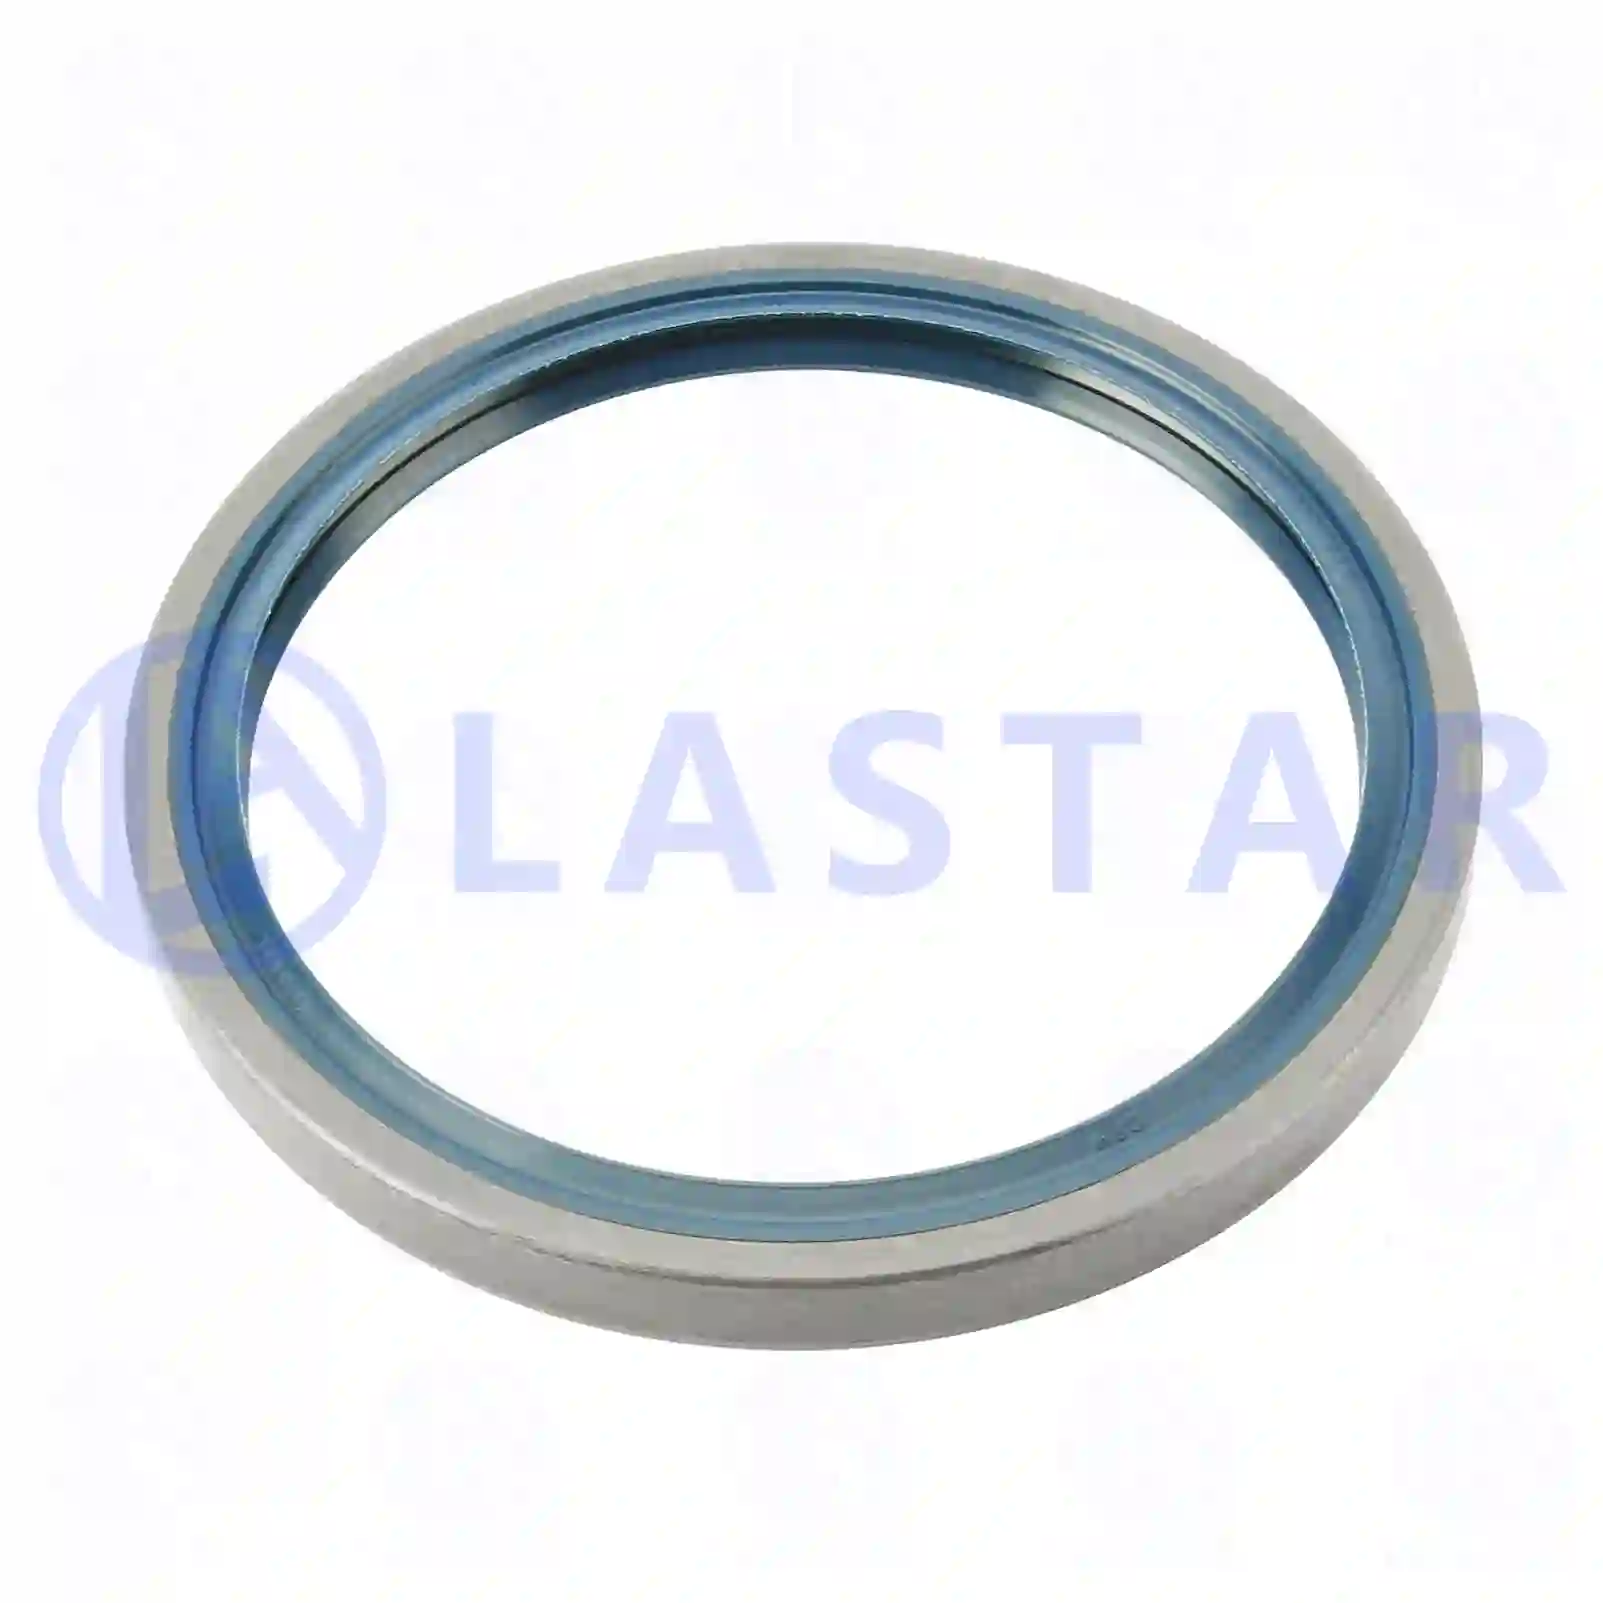 Oil seal, 77730511, 04566349, 392785X1, 04566349, 05107808, 215290400, 20772463, 946093 ||  77730511 Lastar Spare Part | Truck Spare Parts, Auotomotive Spare Parts Oil seal, 77730511, 04566349, 392785X1, 04566349, 05107808, 215290400, 20772463, 946093 ||  77730511 Lastar Spare Part | Truck Spare Parts, Auotomotive Spare Parts